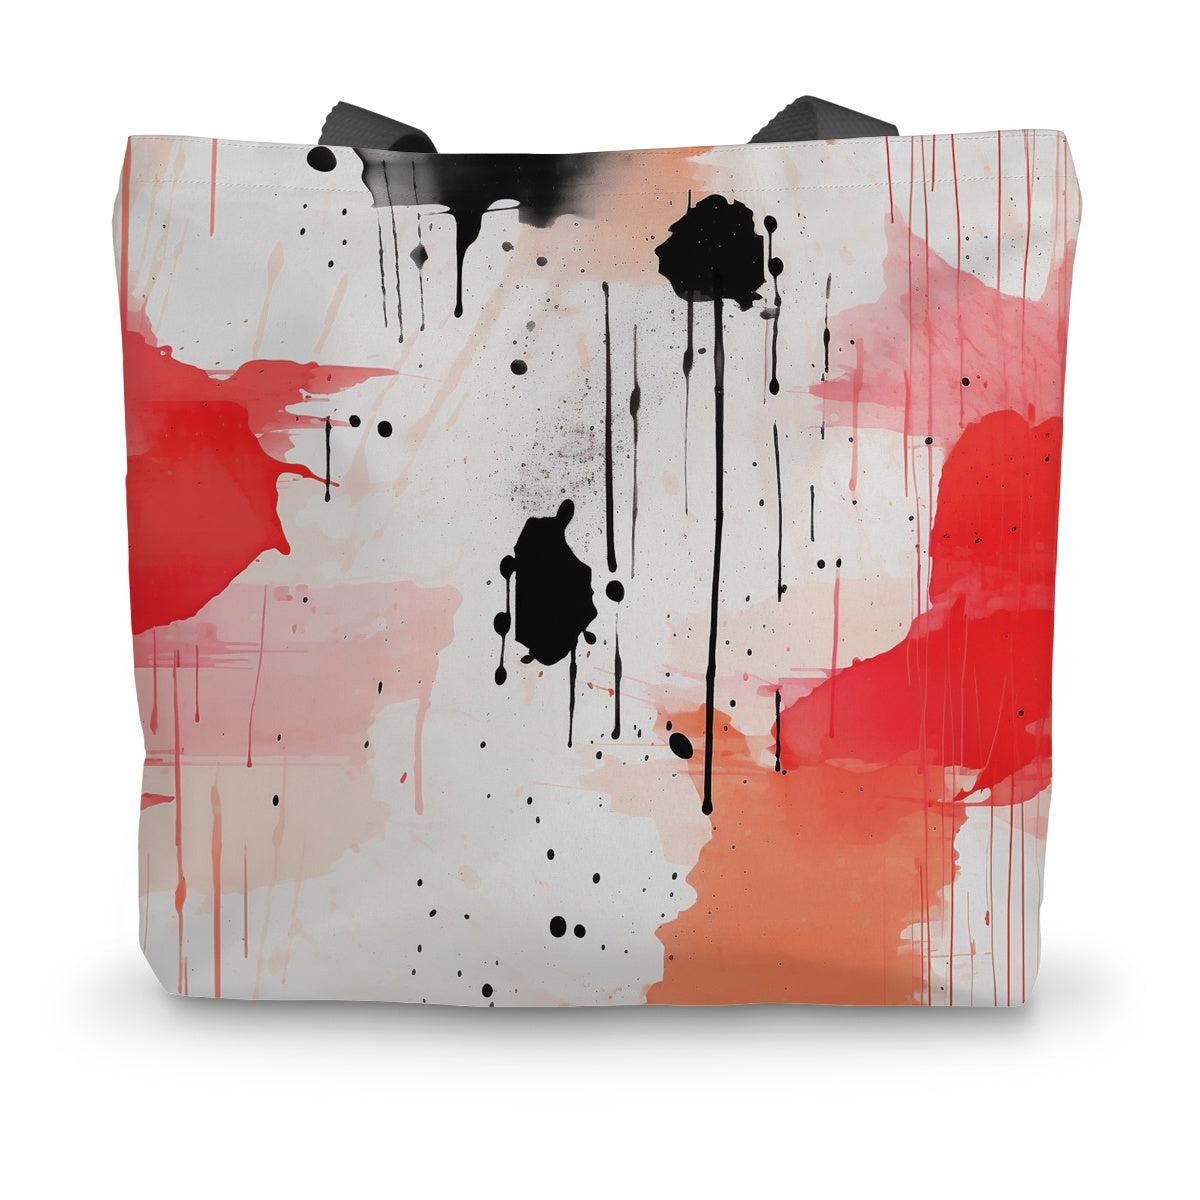 Splasher on the Go: Vibrant Red Canvas Tote Bag!